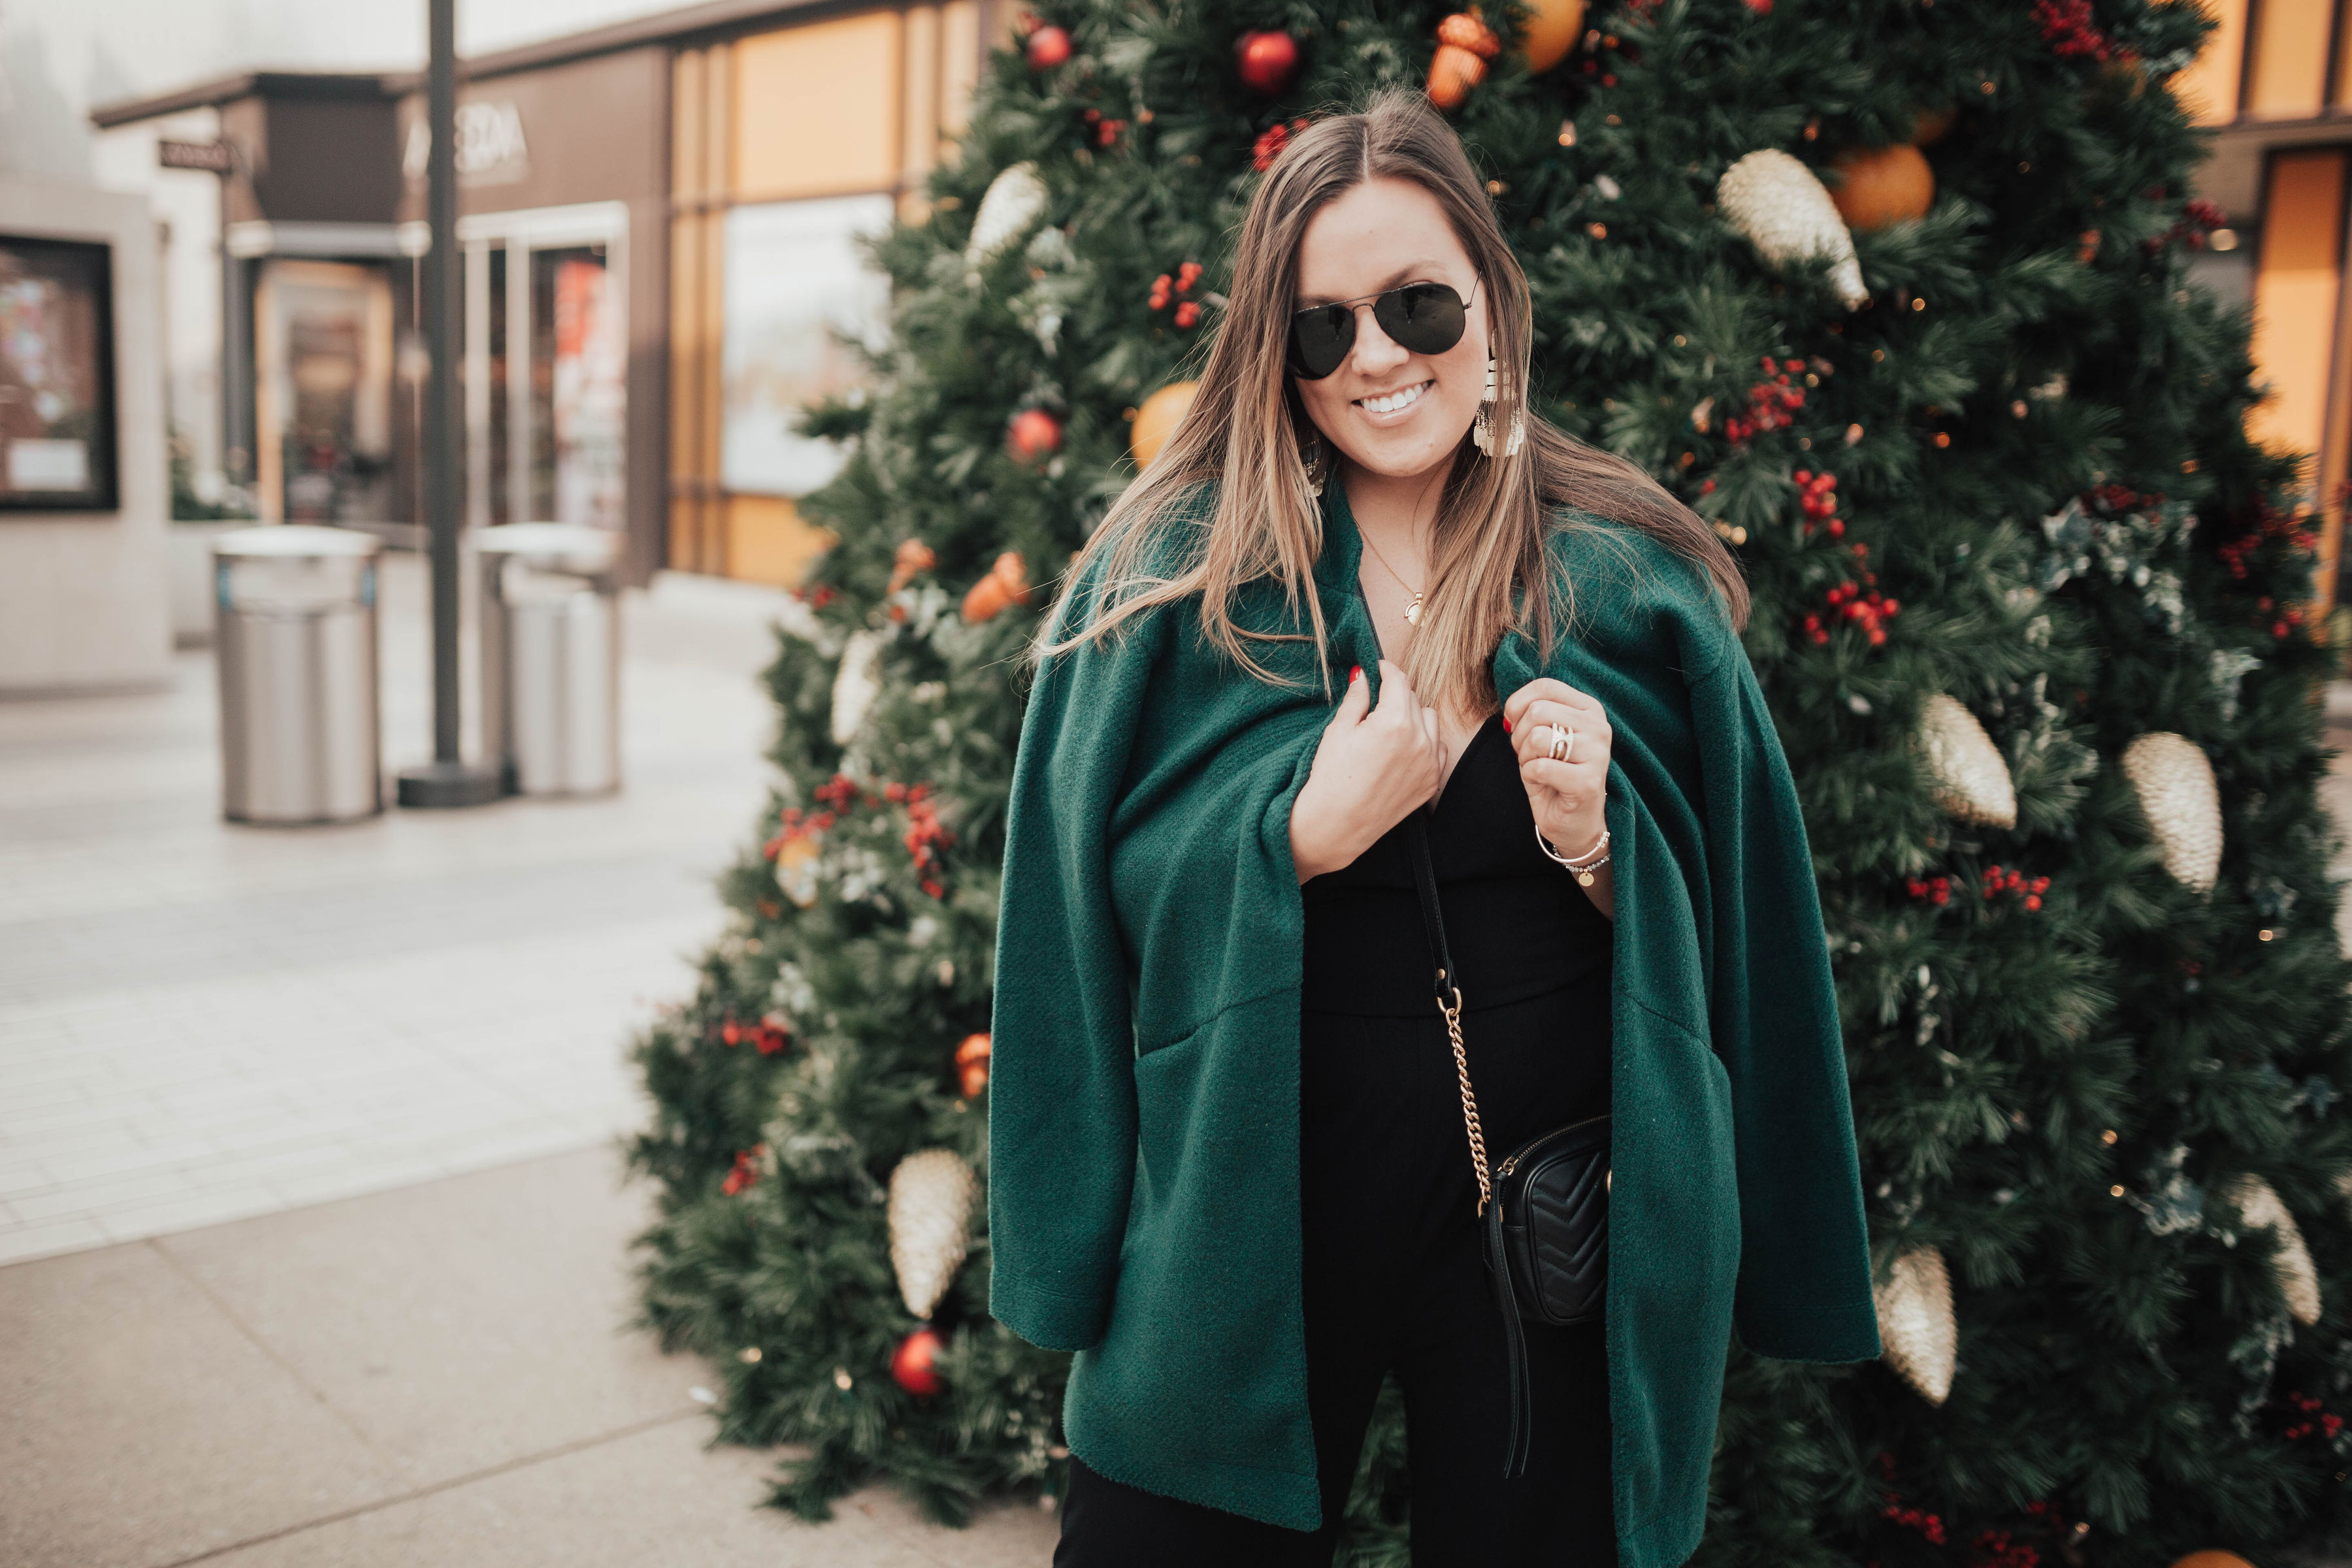 San Francisco blogger Ashley Zeal from Two Peas in a Prada shares her favorite holiday styles from Express. It's time to shine! 